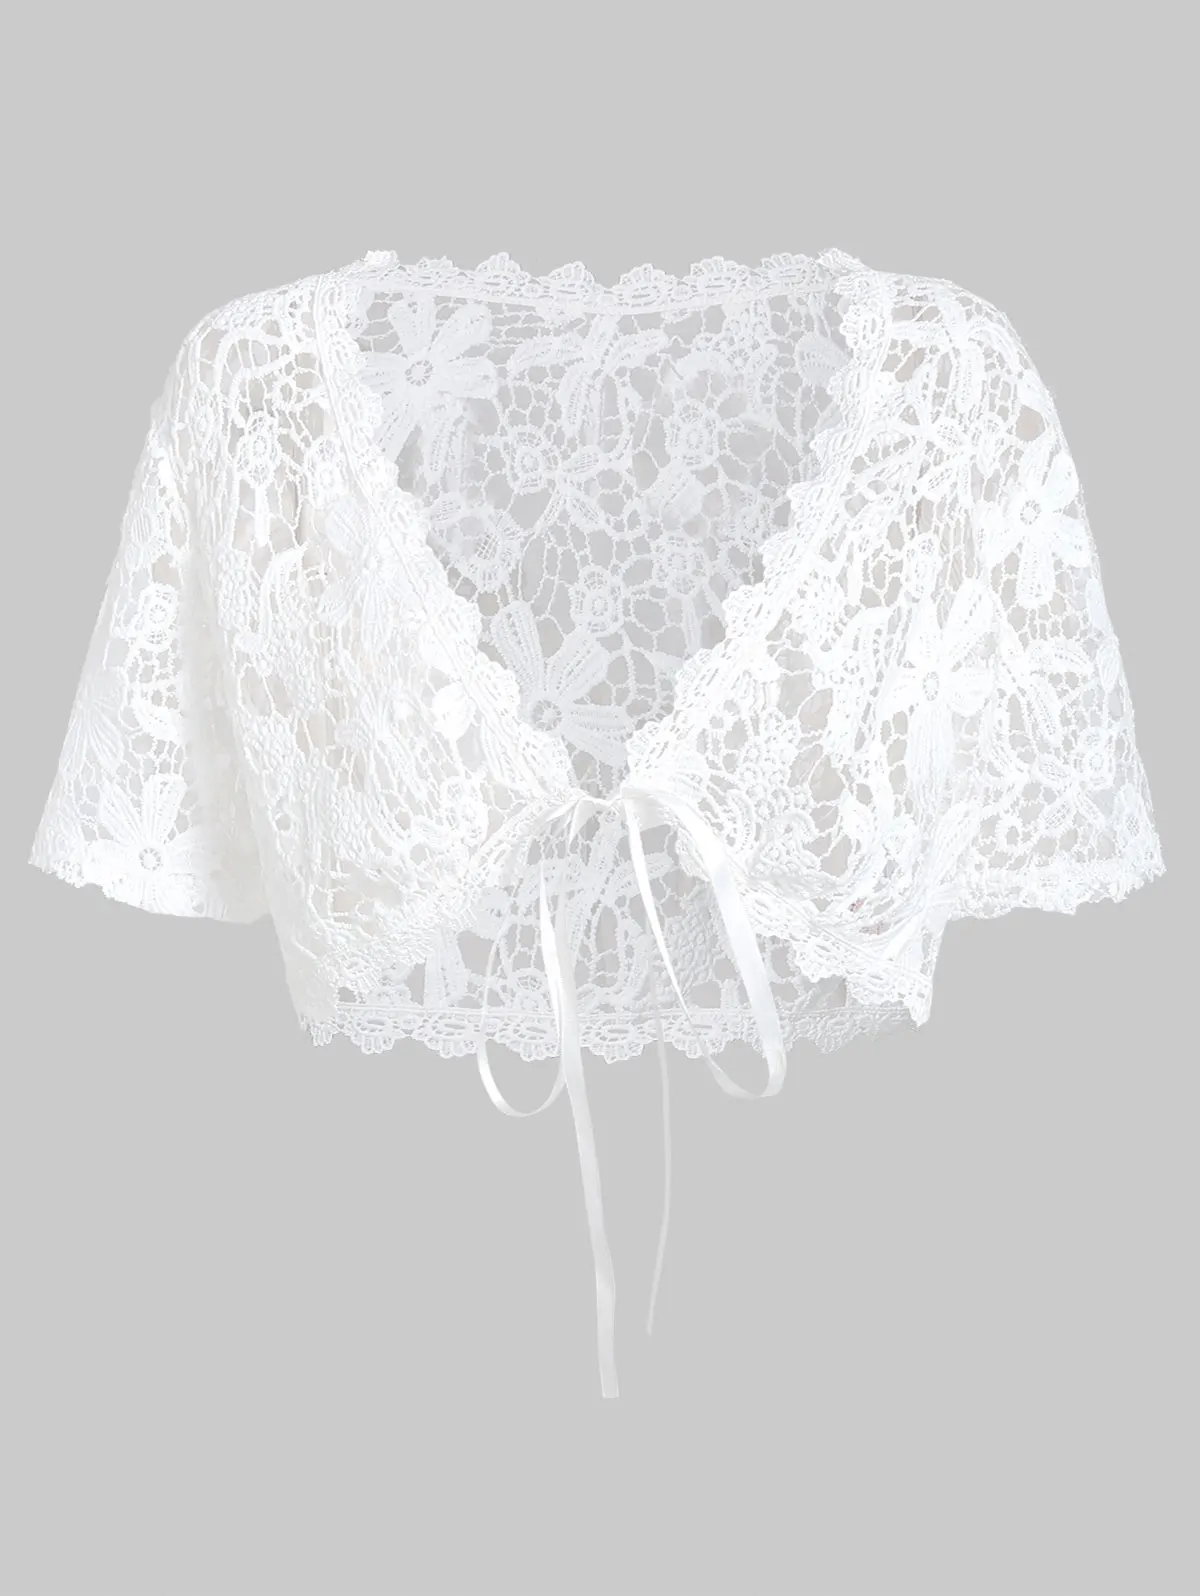  Wipalo Plus Size Lace Top With Layered Handkerchief Cami Top Summer Two Piece Tops Spaghetti Strap 